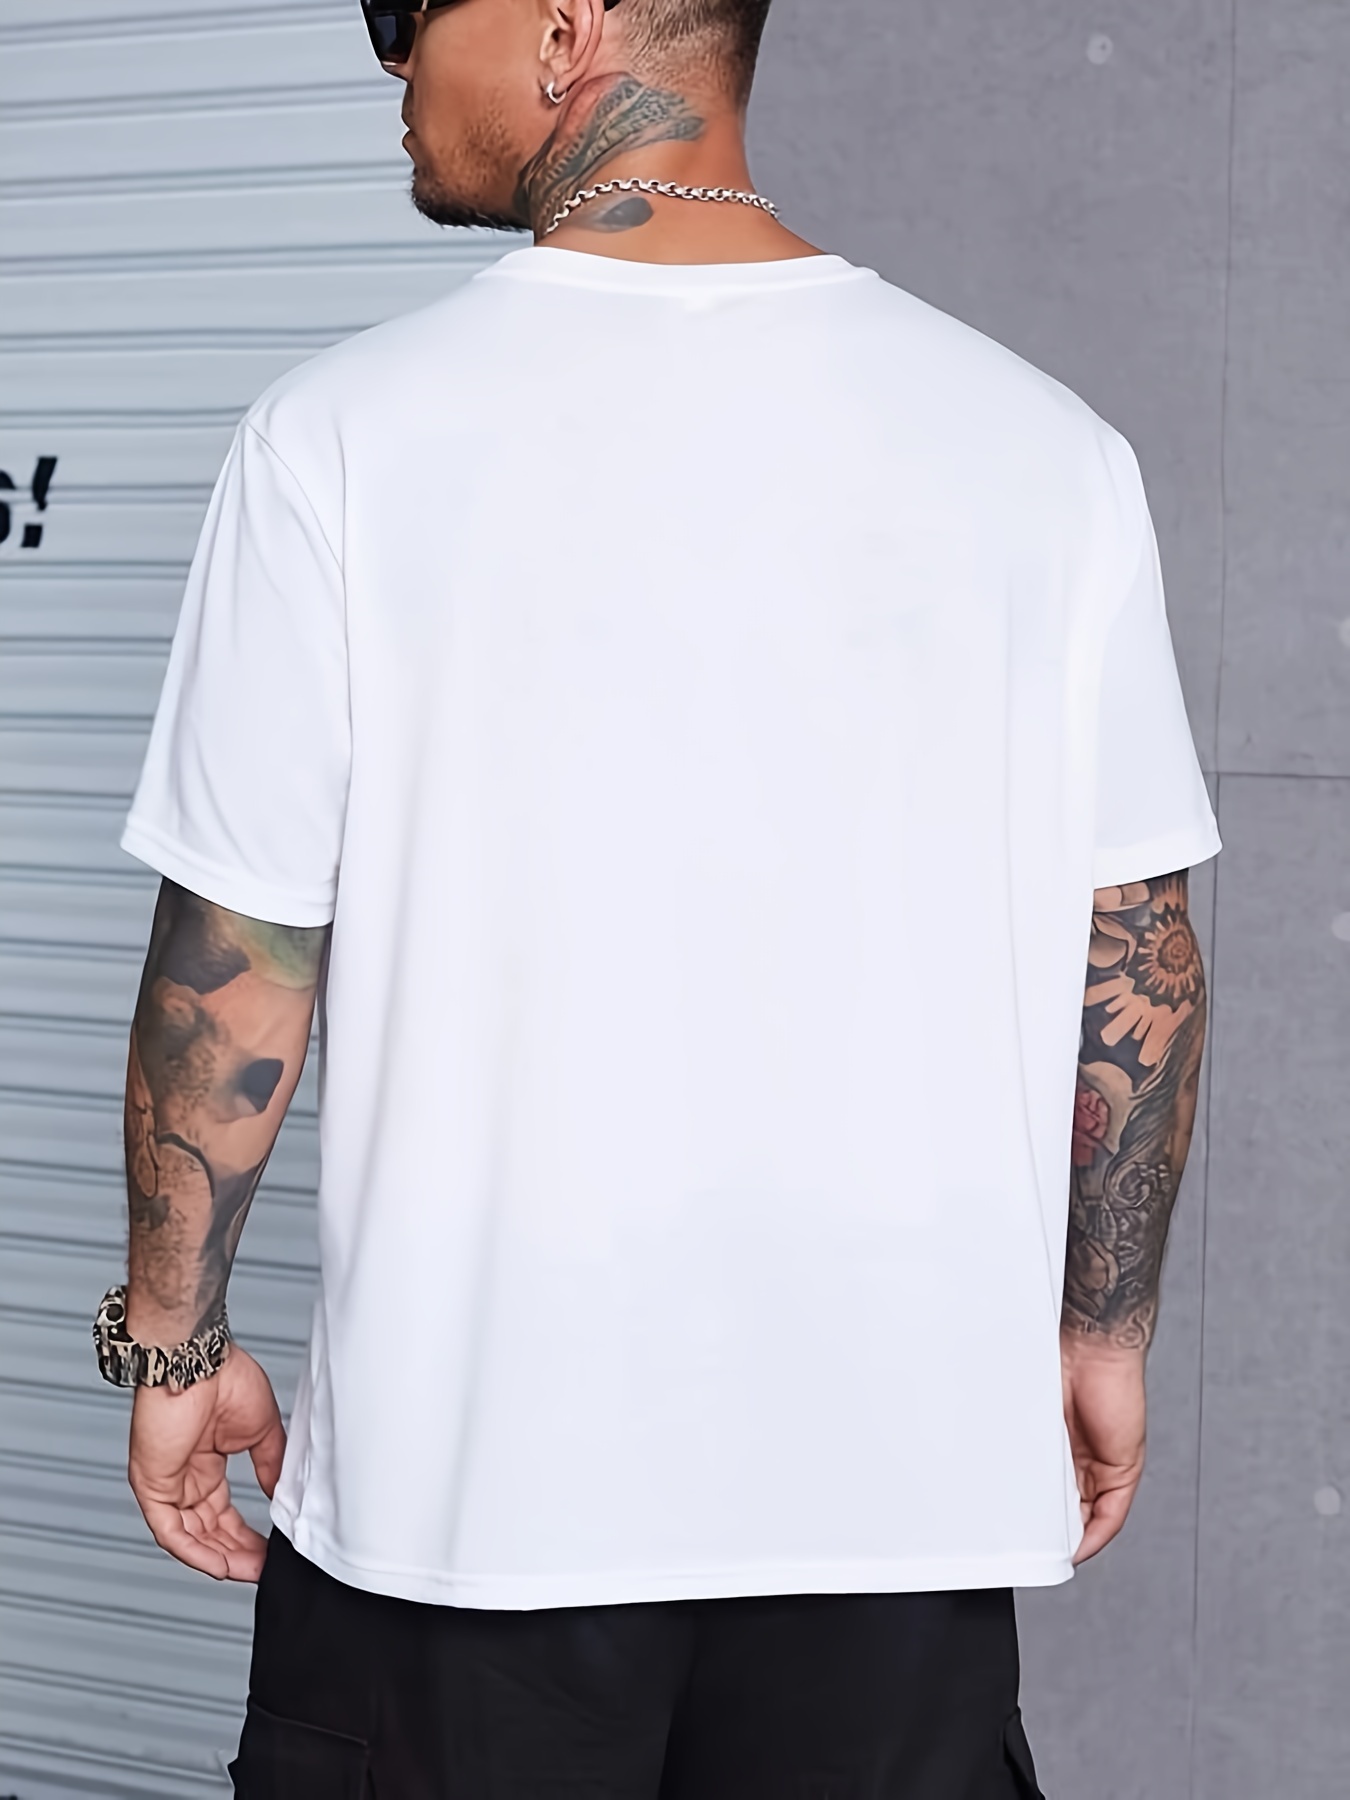 boston print short sleeve t shirts for men plus size stretchy graphic tees for summer casual daily style details 6